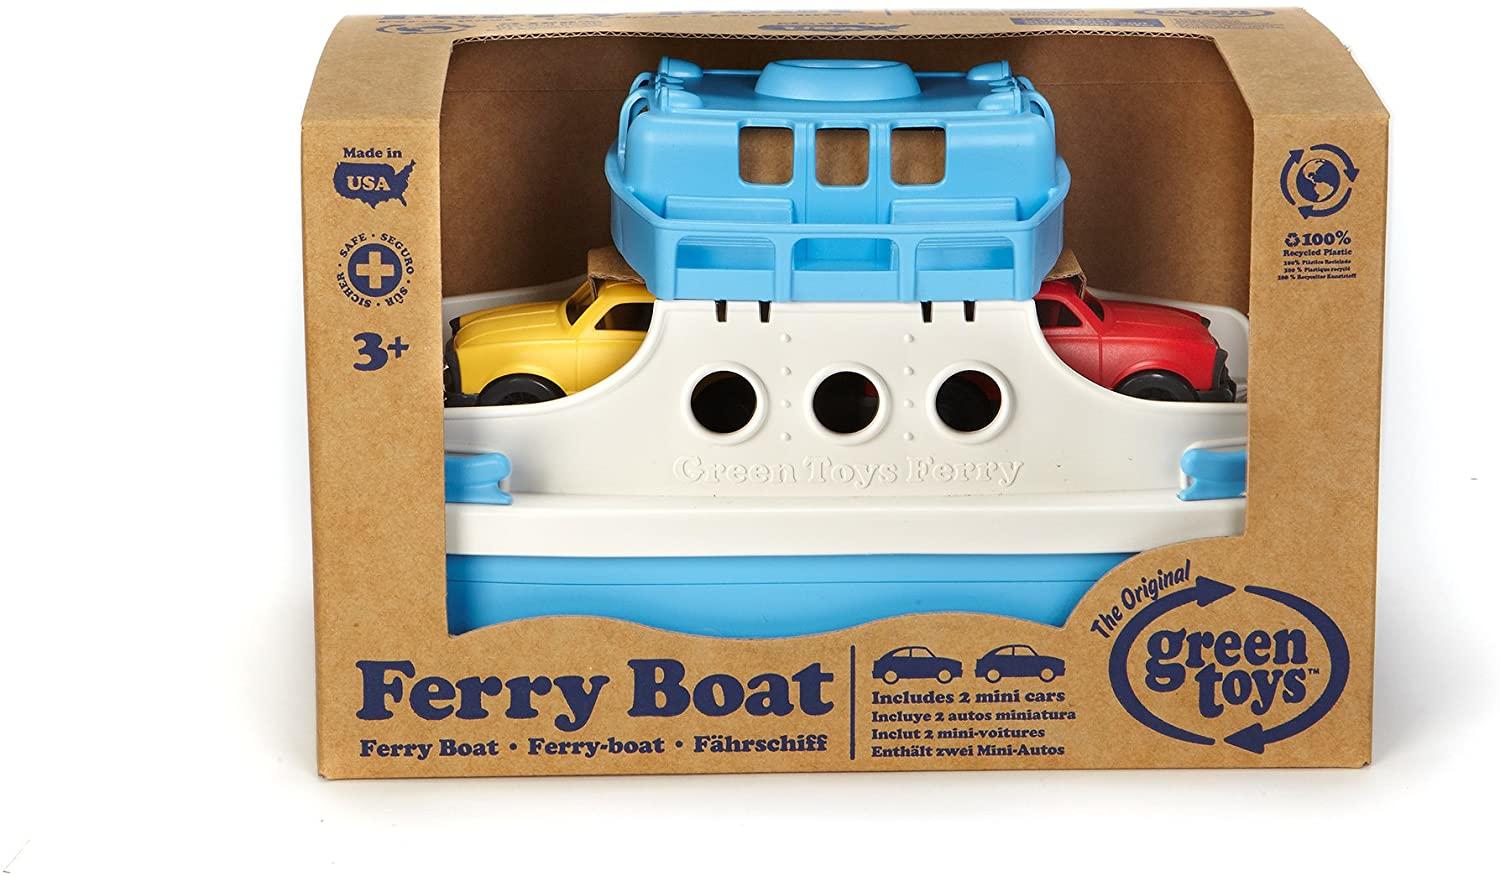 Recycled plastic ferry in manufacturer's packaging,